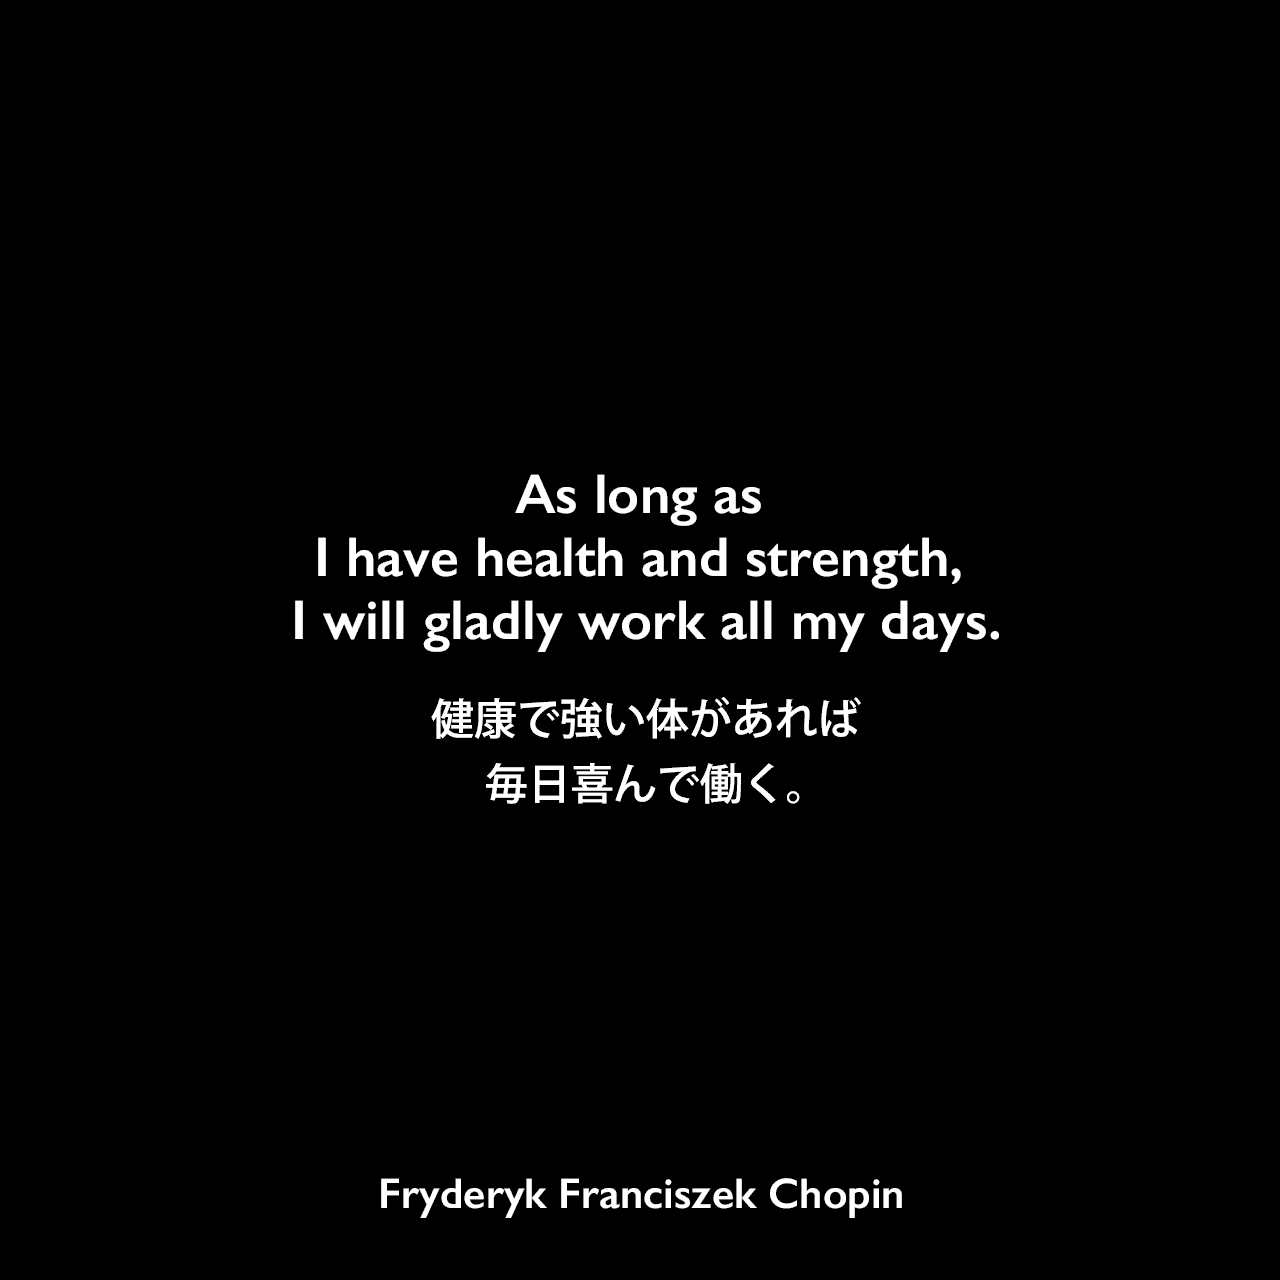 As long as I have health and strength, I will gladly work all my days.健康で強い体があれば毎日喜んで働く。Fryderyk Franciszek Chopin